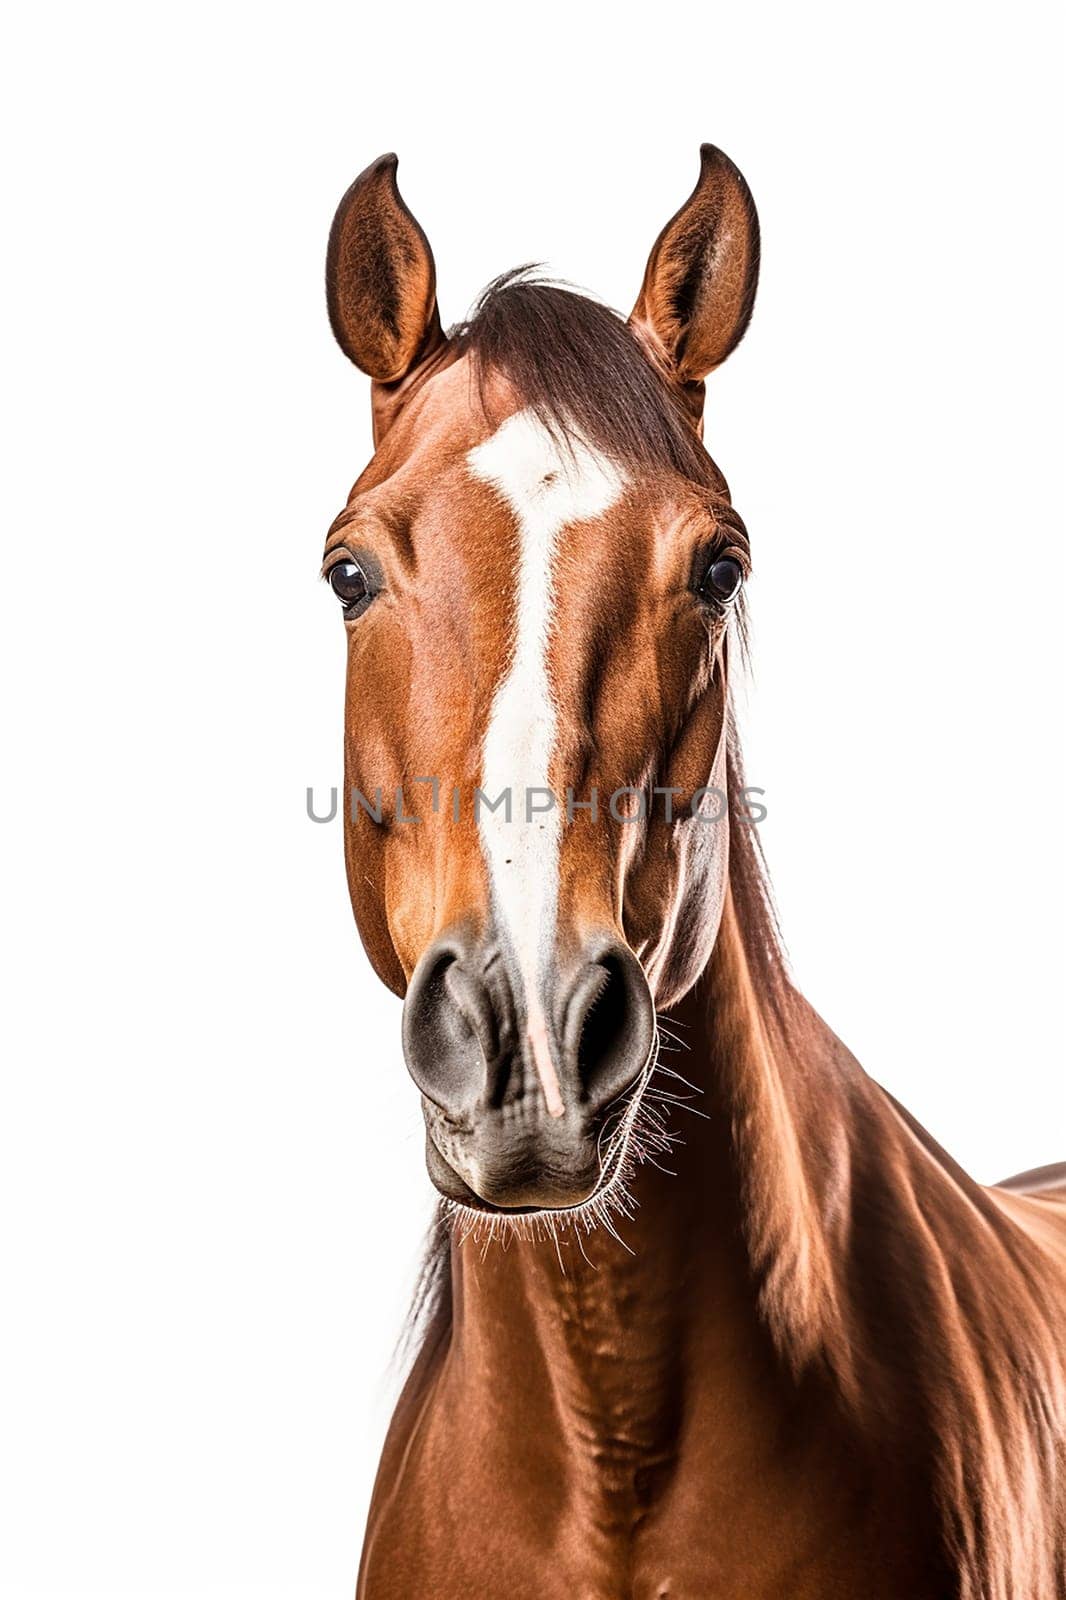 A beautiful brown horse photo, white background